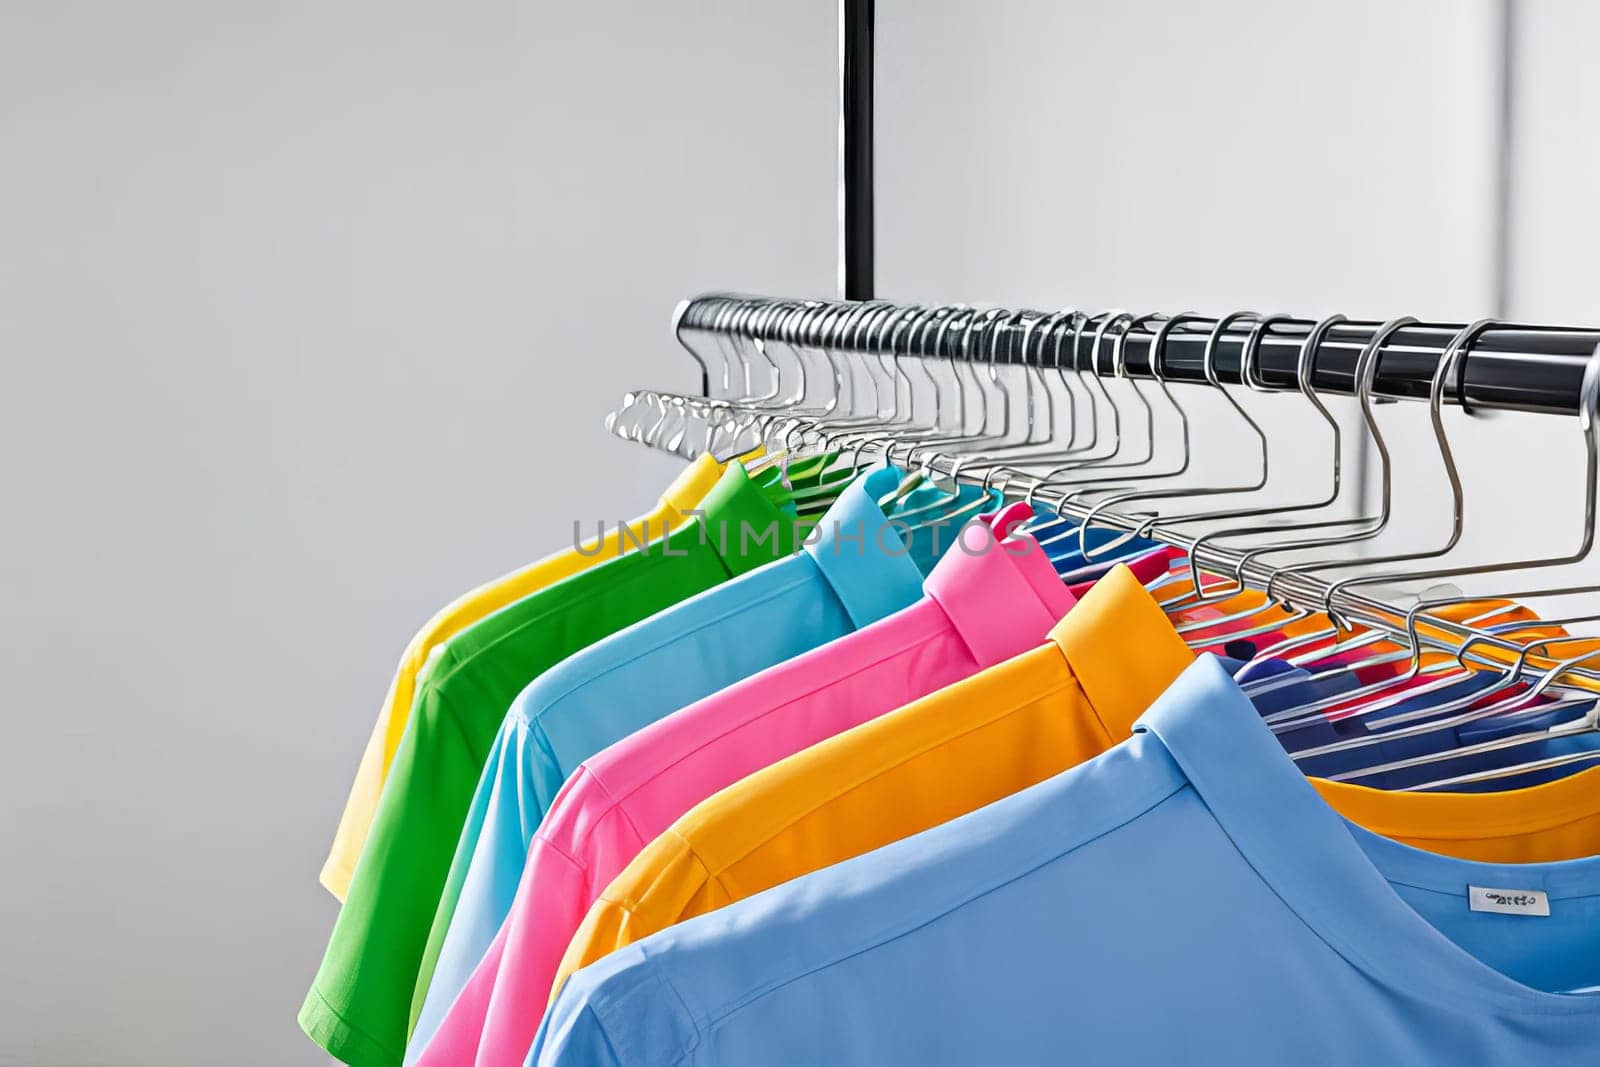 Step into a space where bright colored shirts sway on wire hangers, inviting a sense of cheerfulness and a light, airy atmosphere